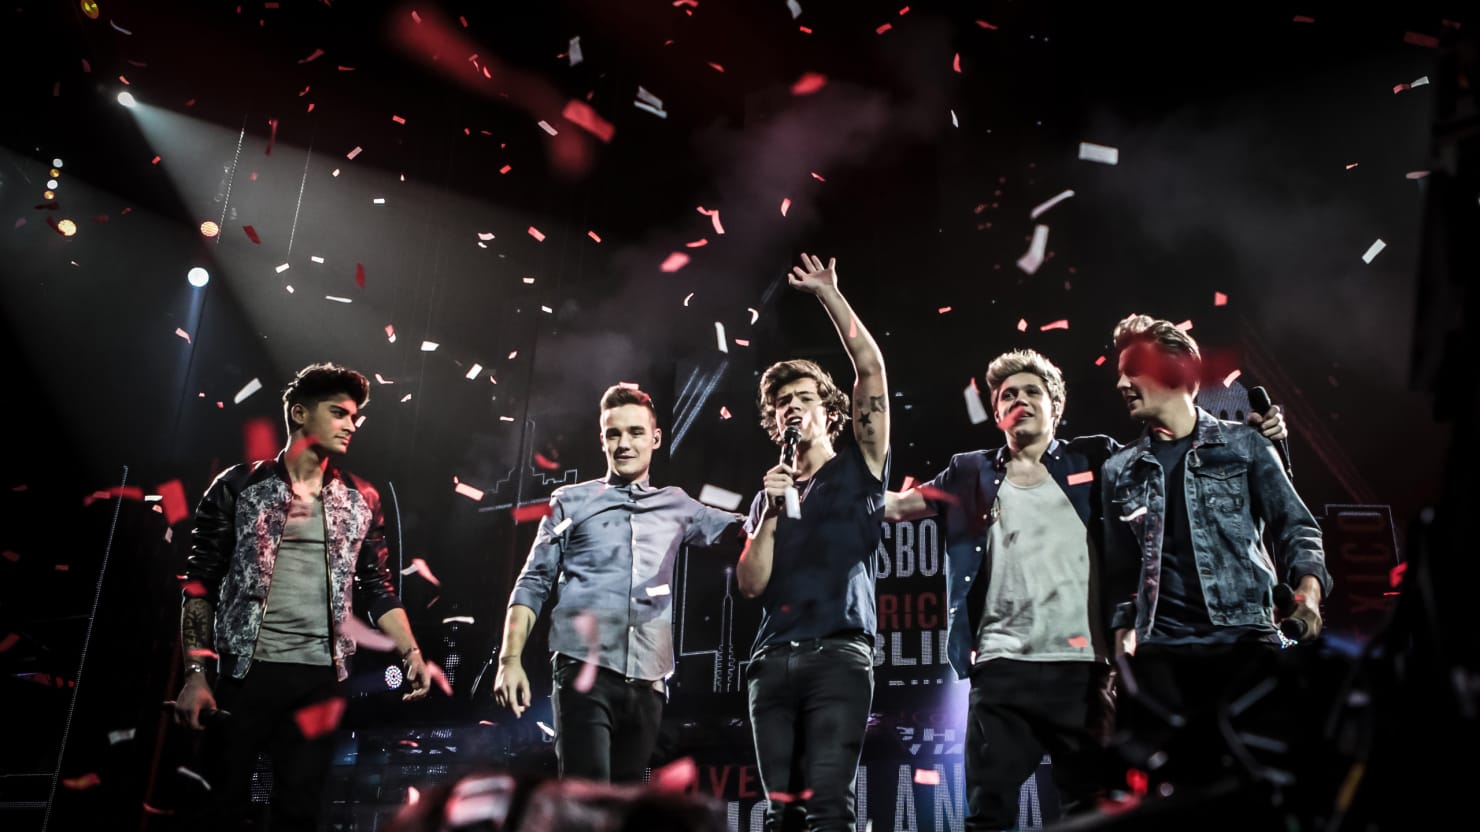 One Direction Documentary ‘This Is Us,’ Seen Through a Superfan’s Eyes